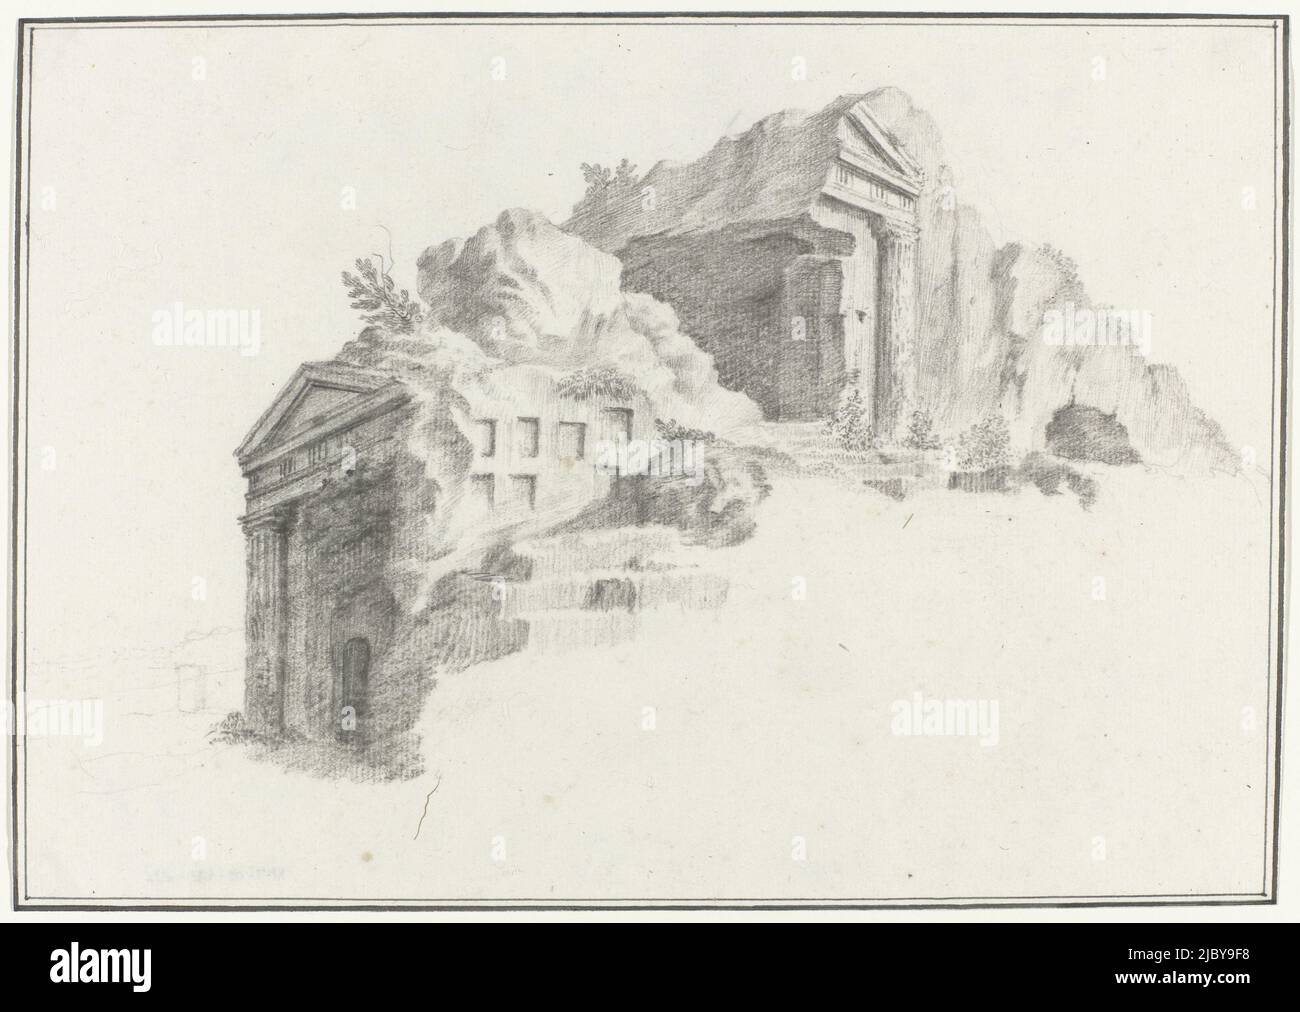 Tomb or tombs with Doric columns carved in rock and located at a distance of 2 miles from Syracuse, Louis Mayer, 1778, Drawing from the album 'Voyage en Italie, en Sicile et à Malte', 1778., draughtsman: Louis Mayer, 1778, paper, h 180 mm × w 256 mm Stock Photo